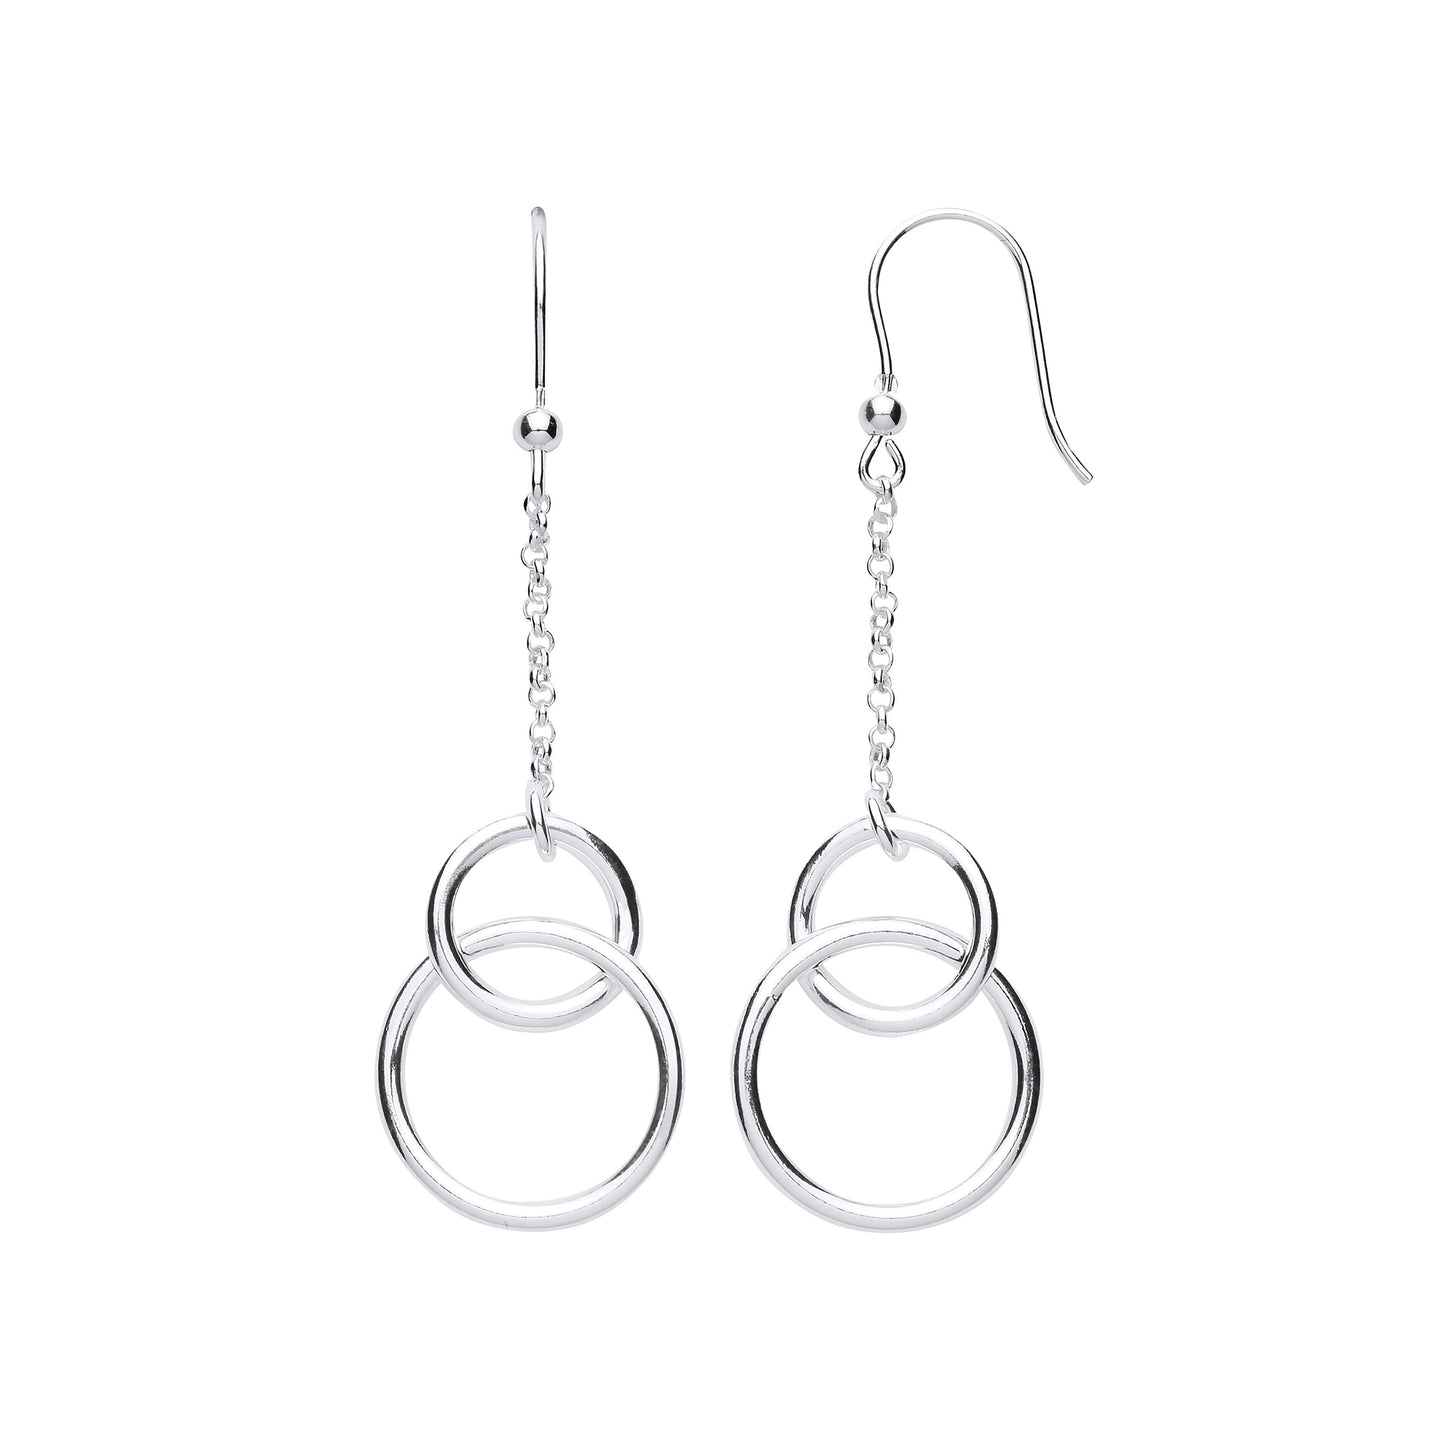 Silver  Magic Chinese Linking Rings Ball Chain Drop Earrings - GVE771